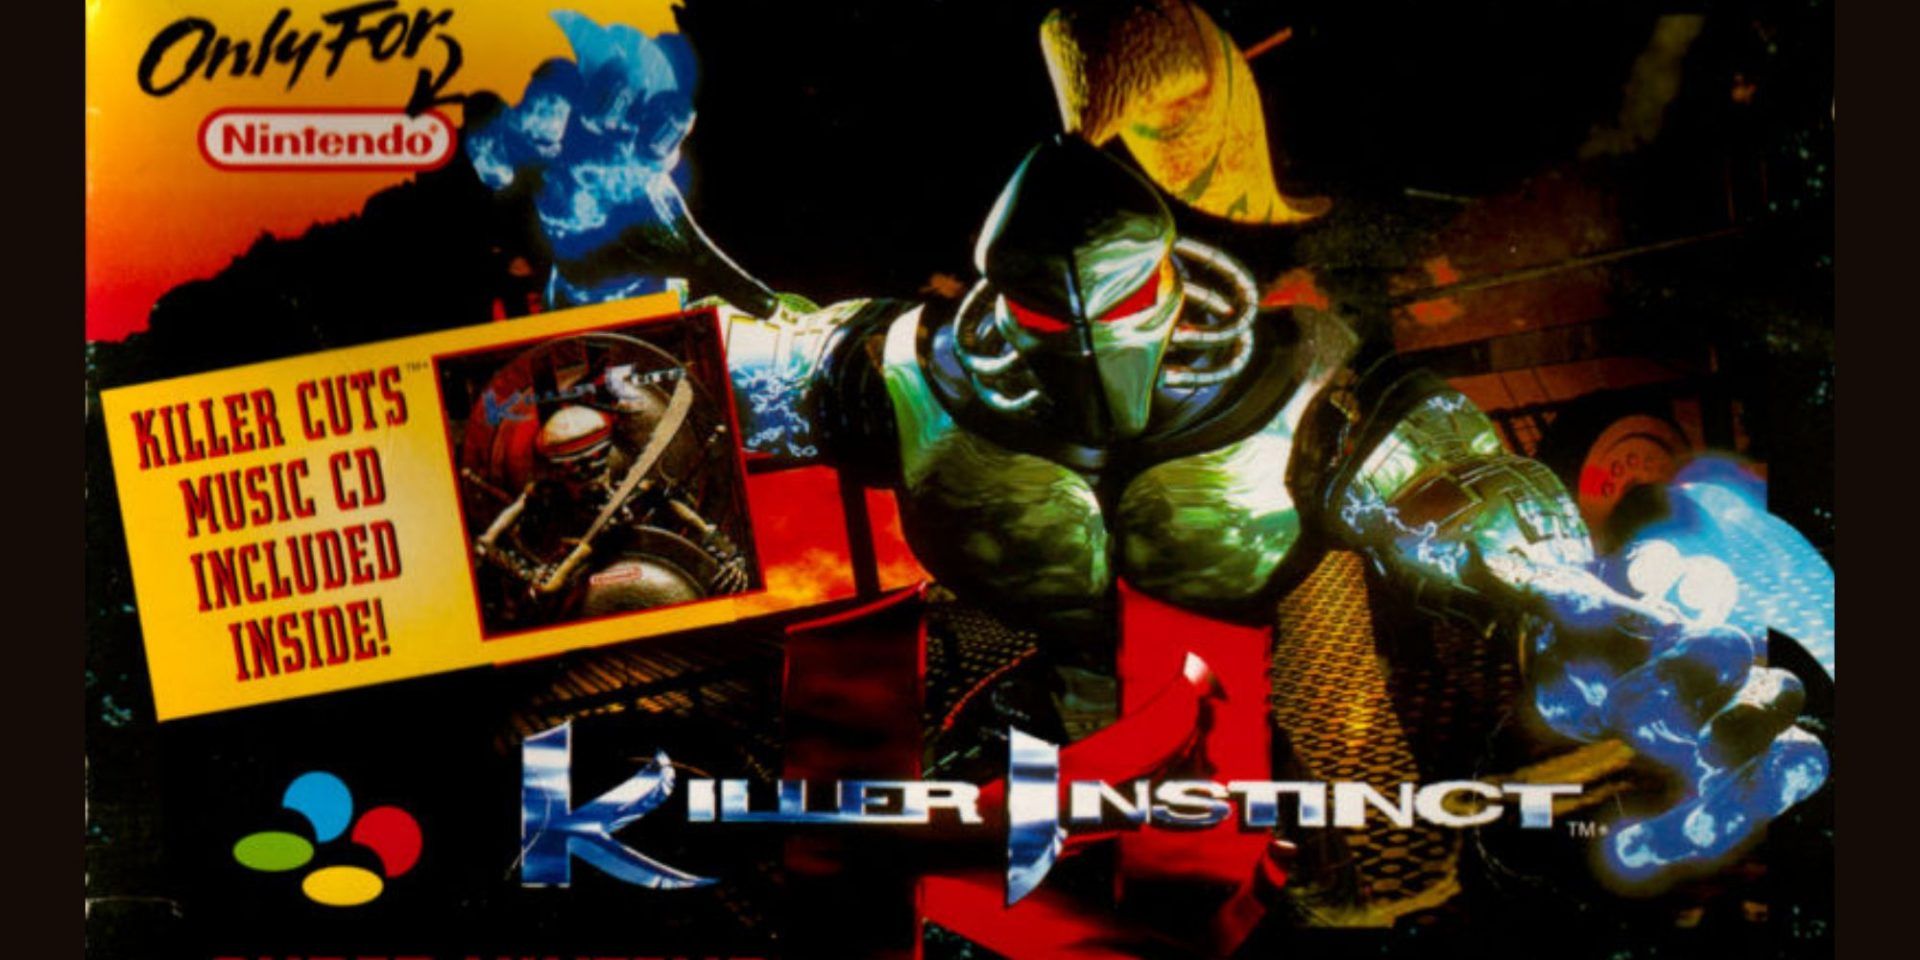 Fulgore ready to viciously attack on the cover of Killer Instinct